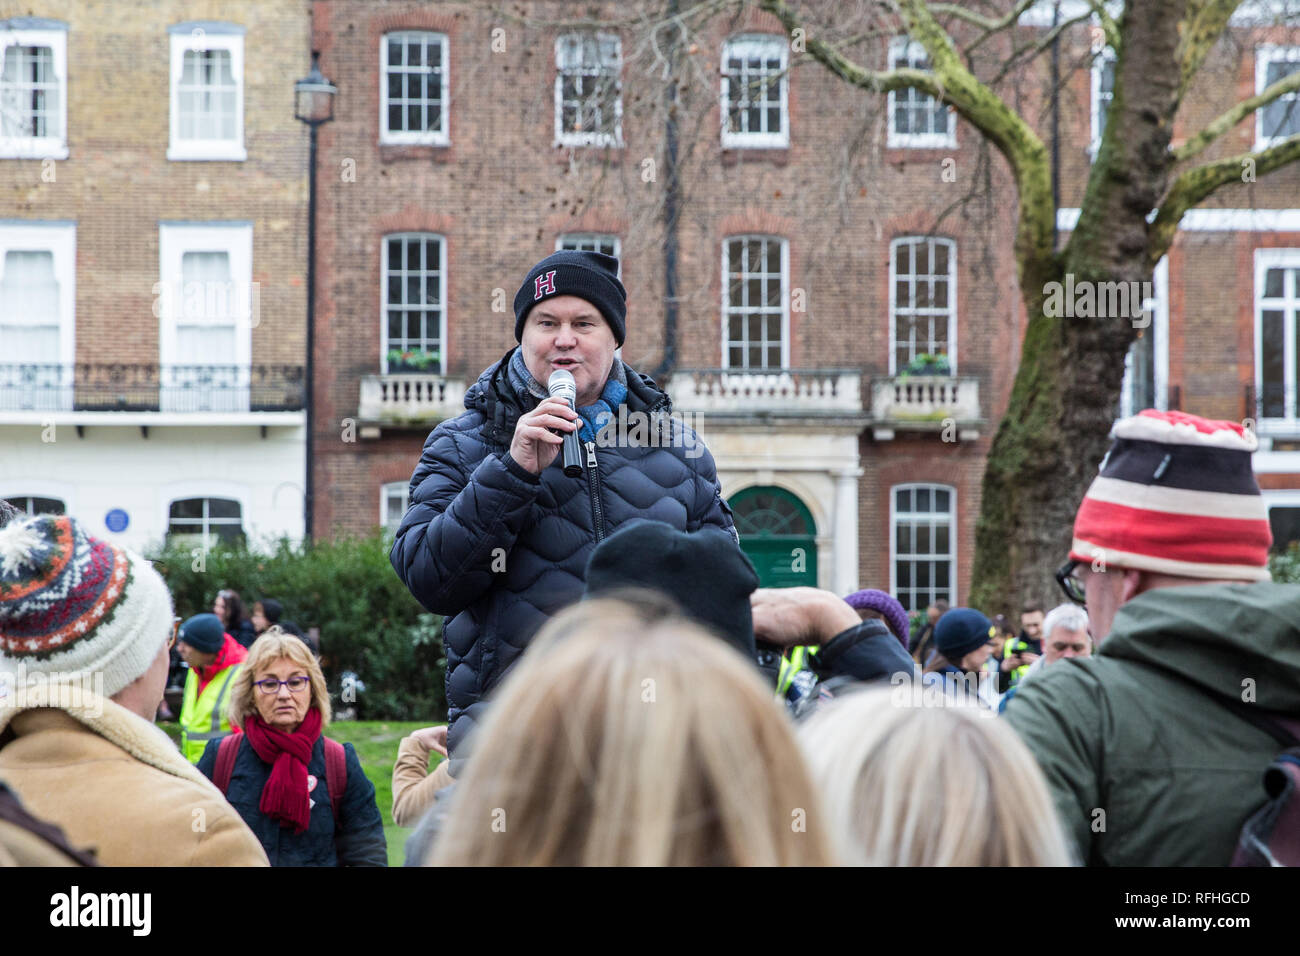 London, UK. 26th January, 2019. Peter Hall, founder of the London Committee for the Abolition of Whaling, addresses animal rights campaigners preparing to take part in the Japan: No Whaling march from Cavendish Square to the Japanese embassy following Japan's announcement that it withdraw from the International Whaling Commission (IWC) and resume commercial whaling with effect from July 2019. The march was organised by the London Committee for the Abolition of Whaling. Credit: Mark Kerrison/Alamy Live News Stock Photo